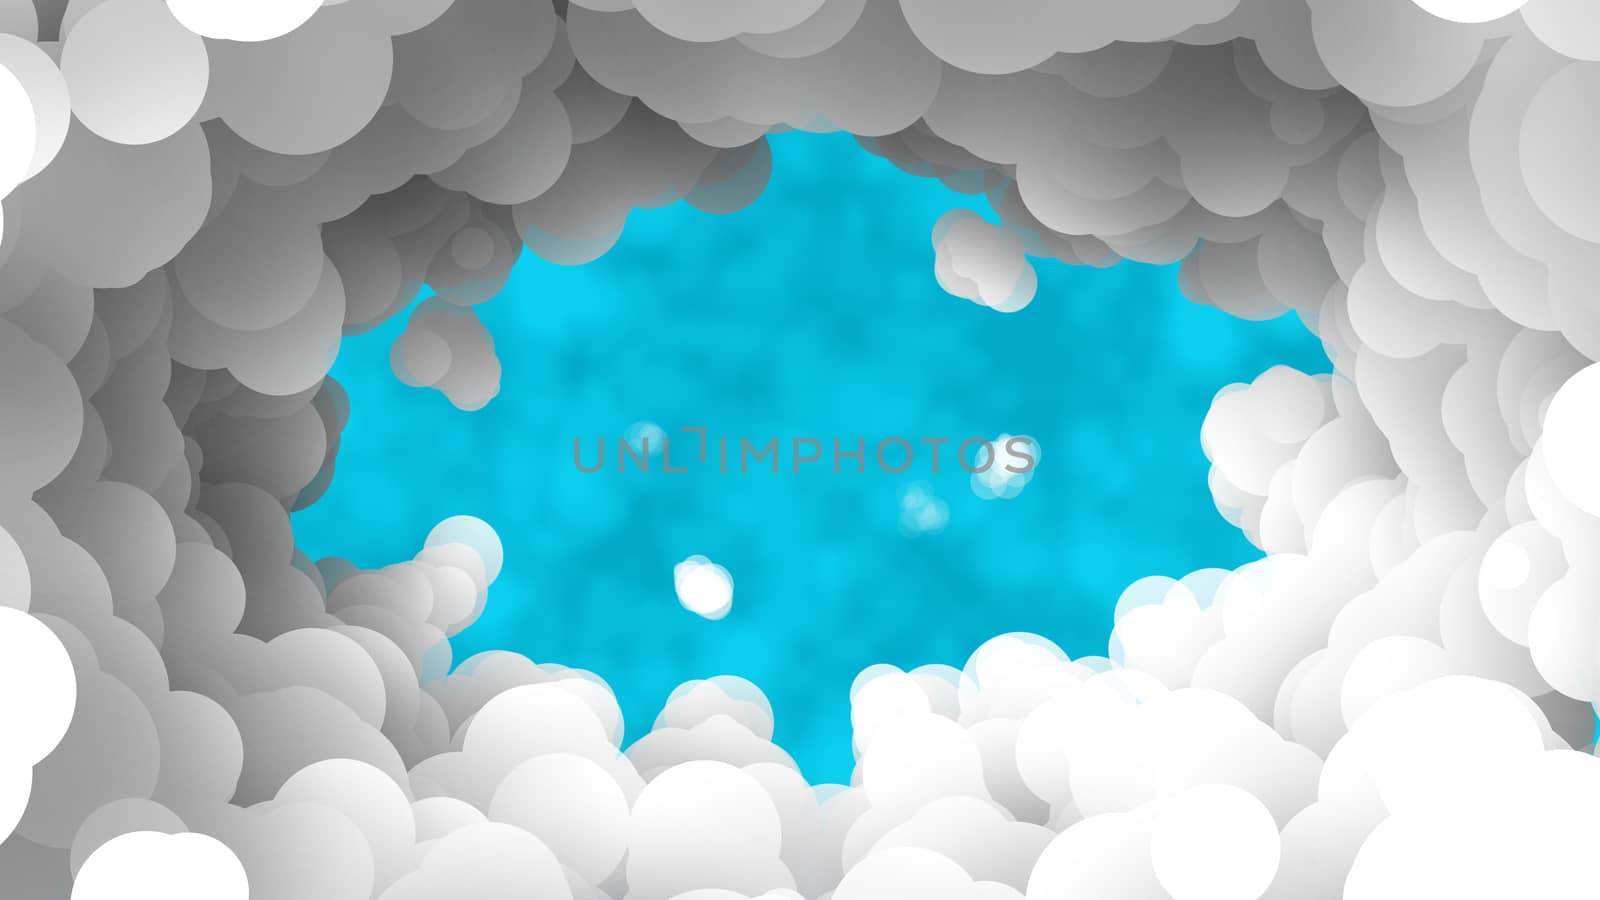 Wonderful 3d rendering of a light blue window in feathery white and grey clouds. It shows that hope exists and looks cheerful, fine and optimistic.